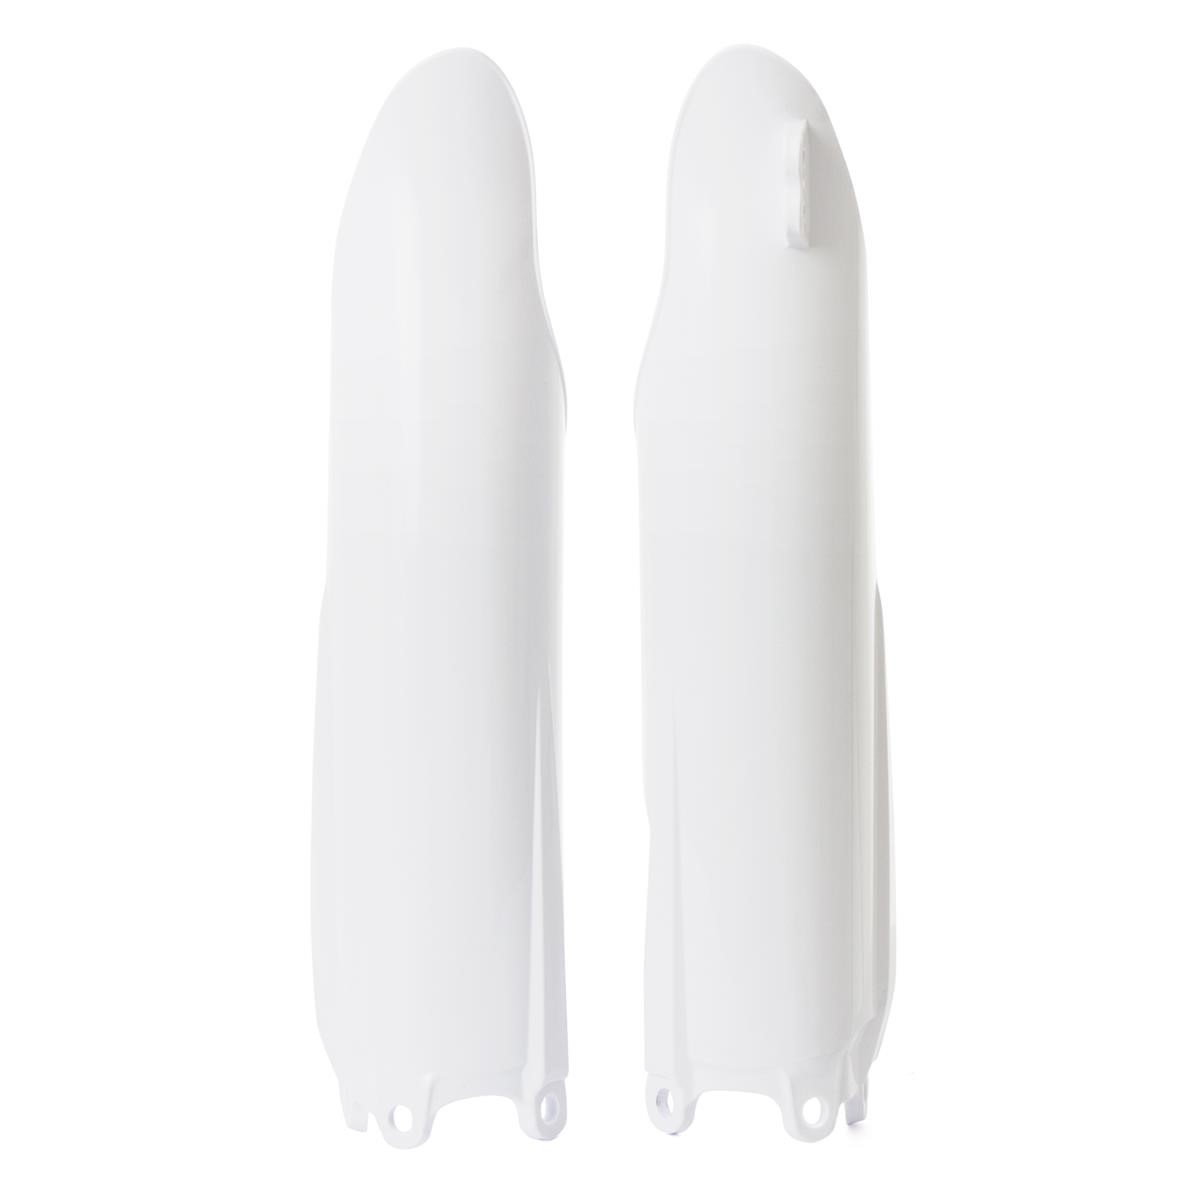 Acerbis Lower Fork Covers  Yamaha YZ 125/250 08-14, YZF 250/450 08-09, White